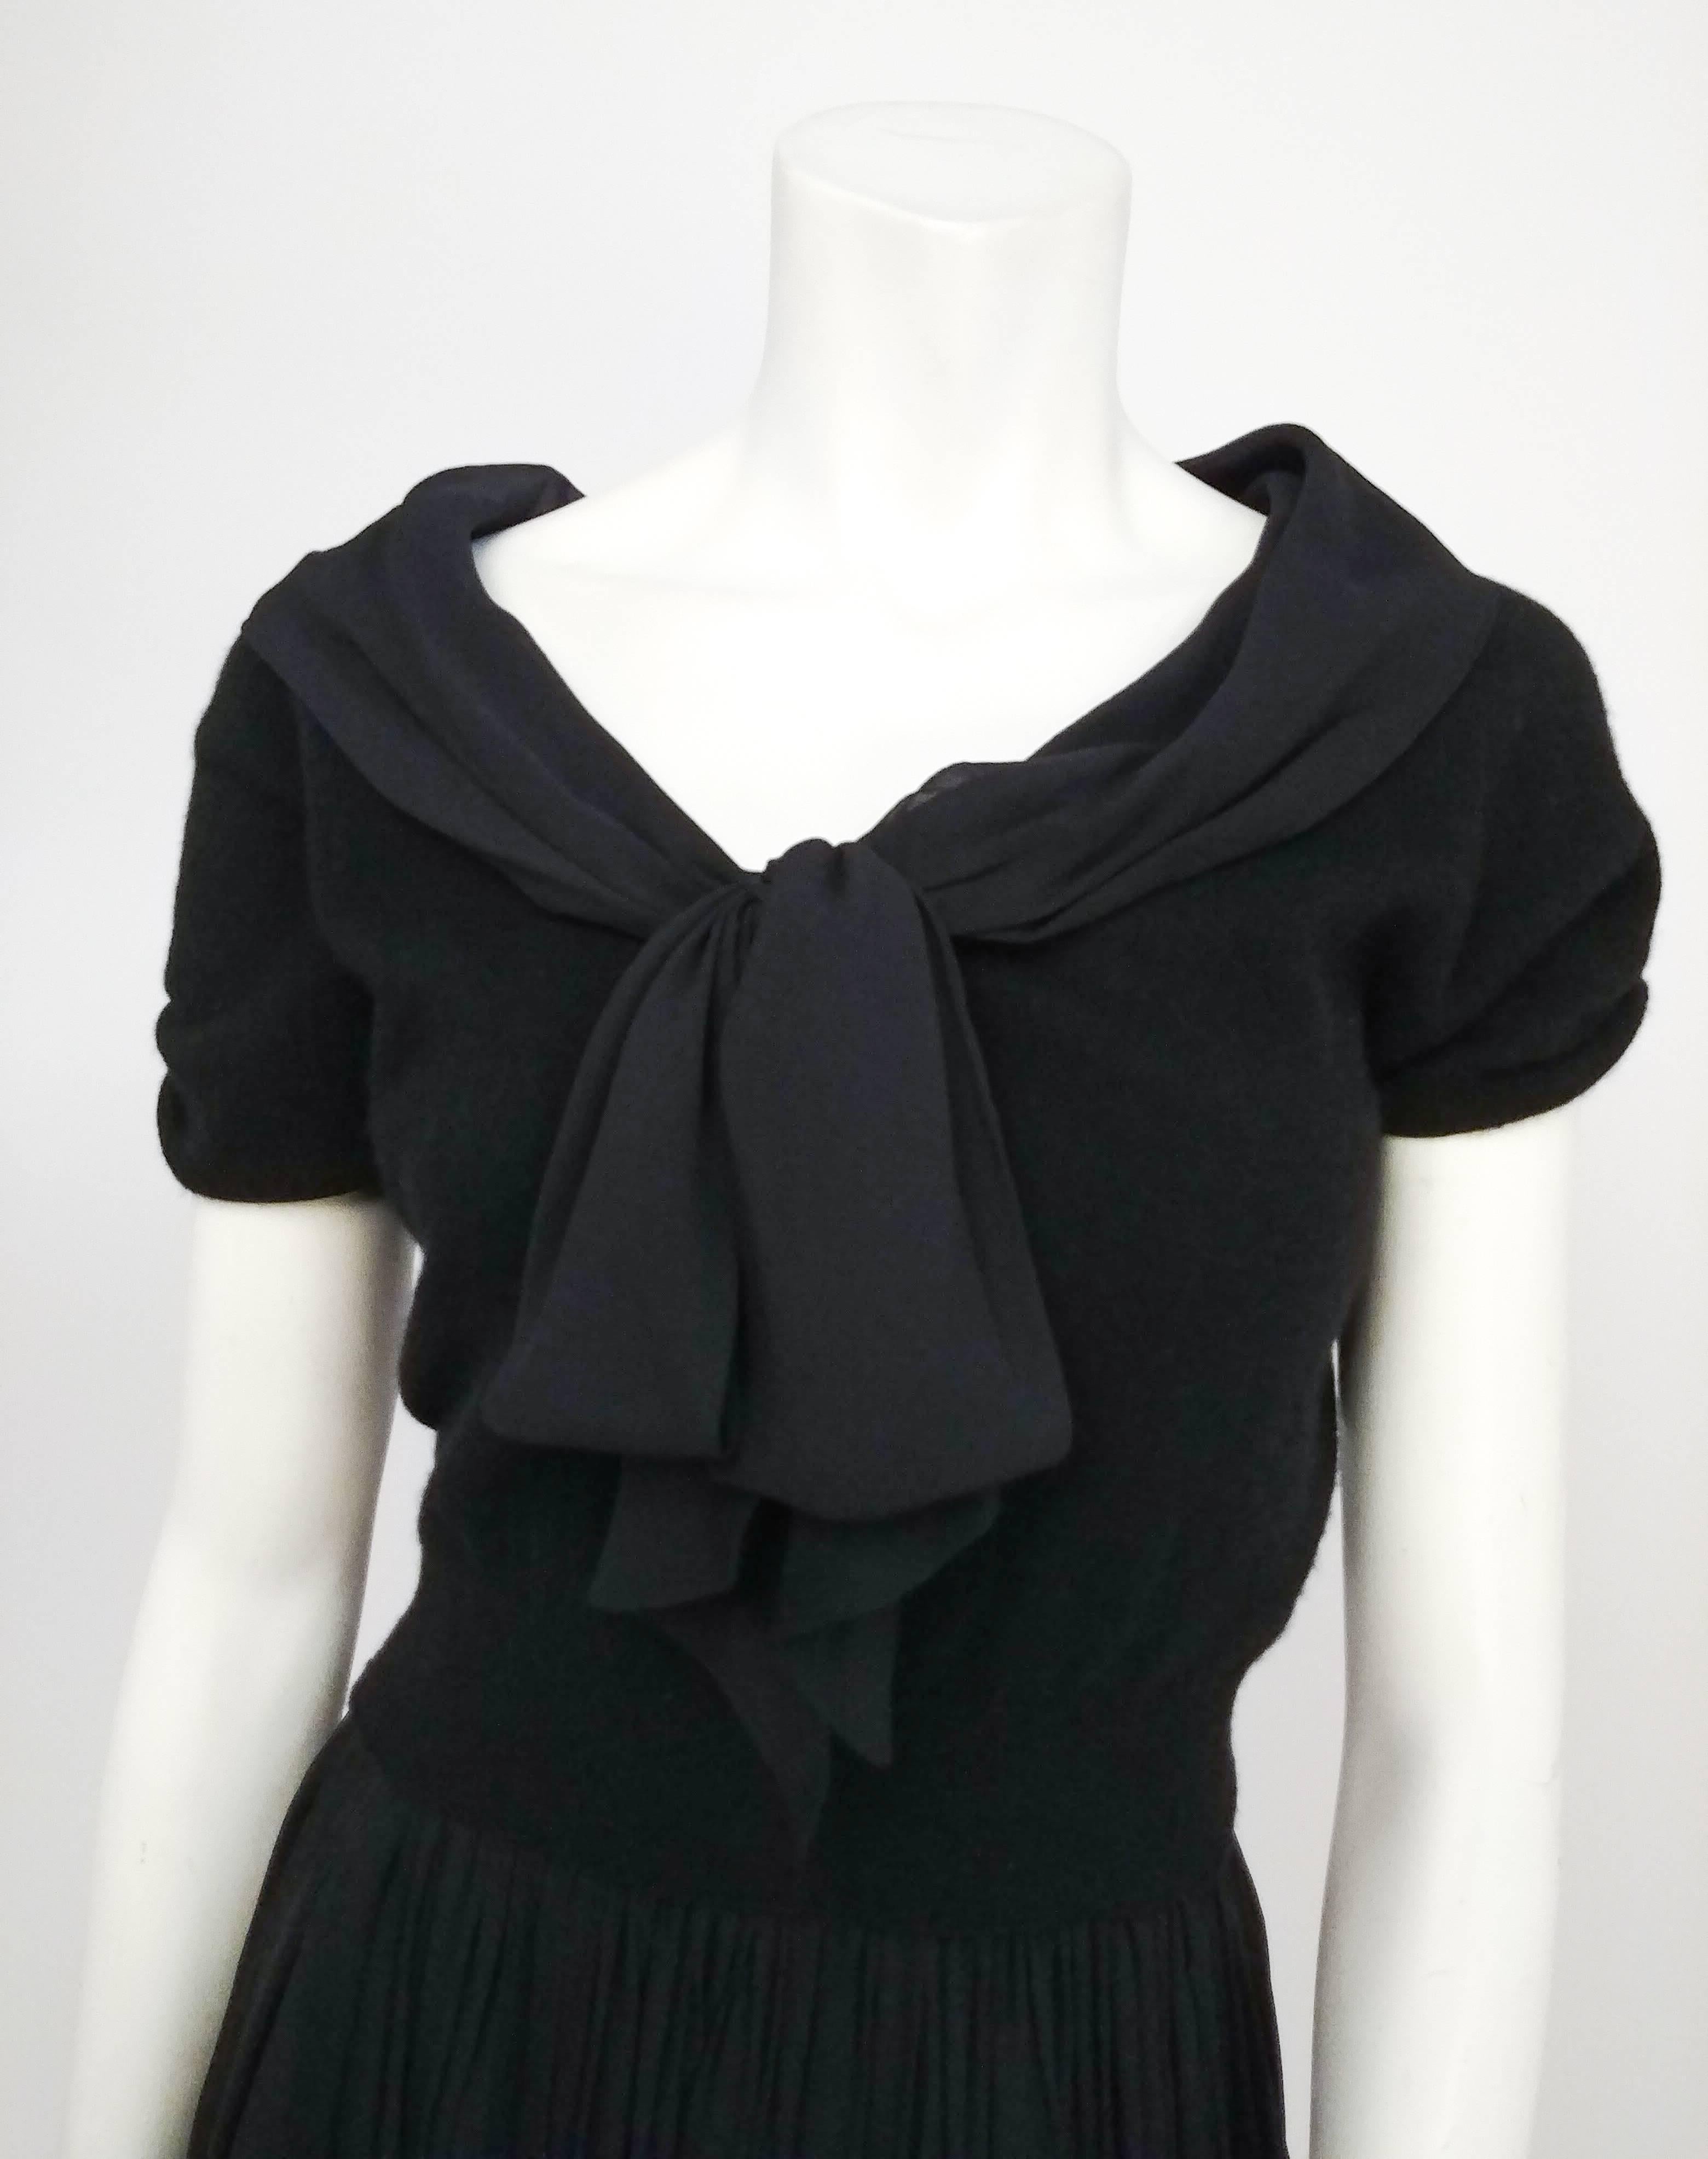 1950s Black Knit Top & Chiffon Skirt Two Piece Set. Adorable two piece set with sweater knit top featuring short gathered sleeves and chiffon tie front collar. Gathered chiffon skirt with natural waistline zips at side.